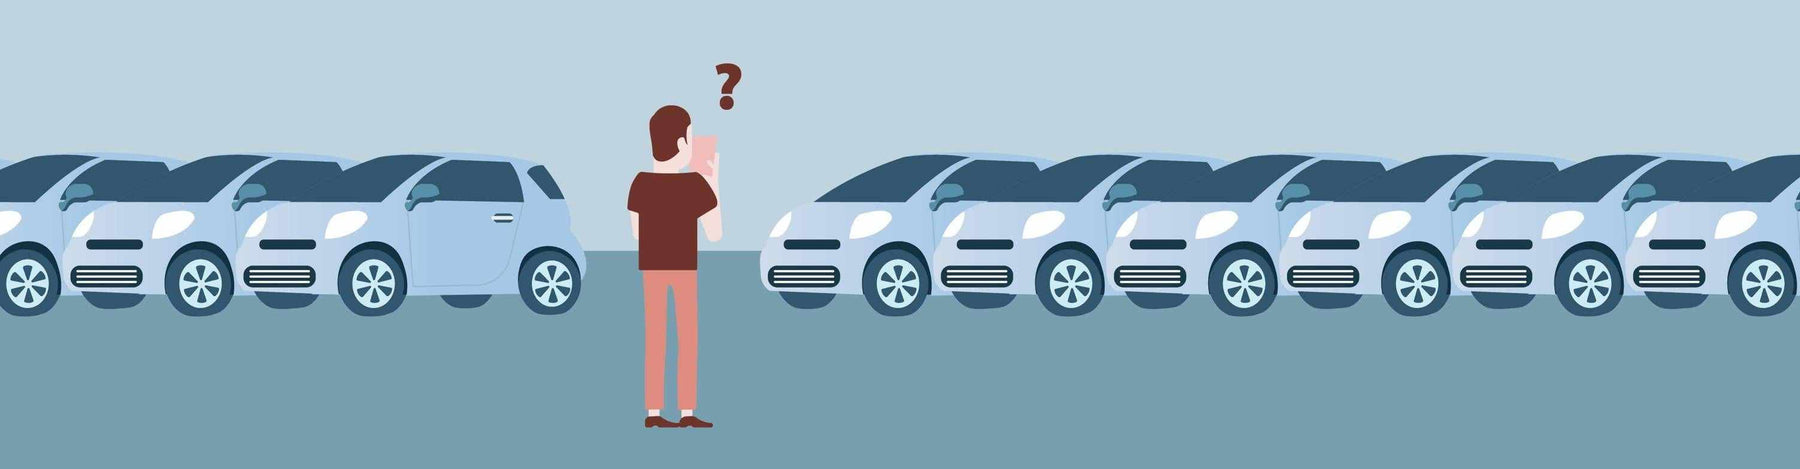 5 Common Mistakes First-Time Car Buyers Make When Looking for "The Car" -  - BlackboxMyCar Canada